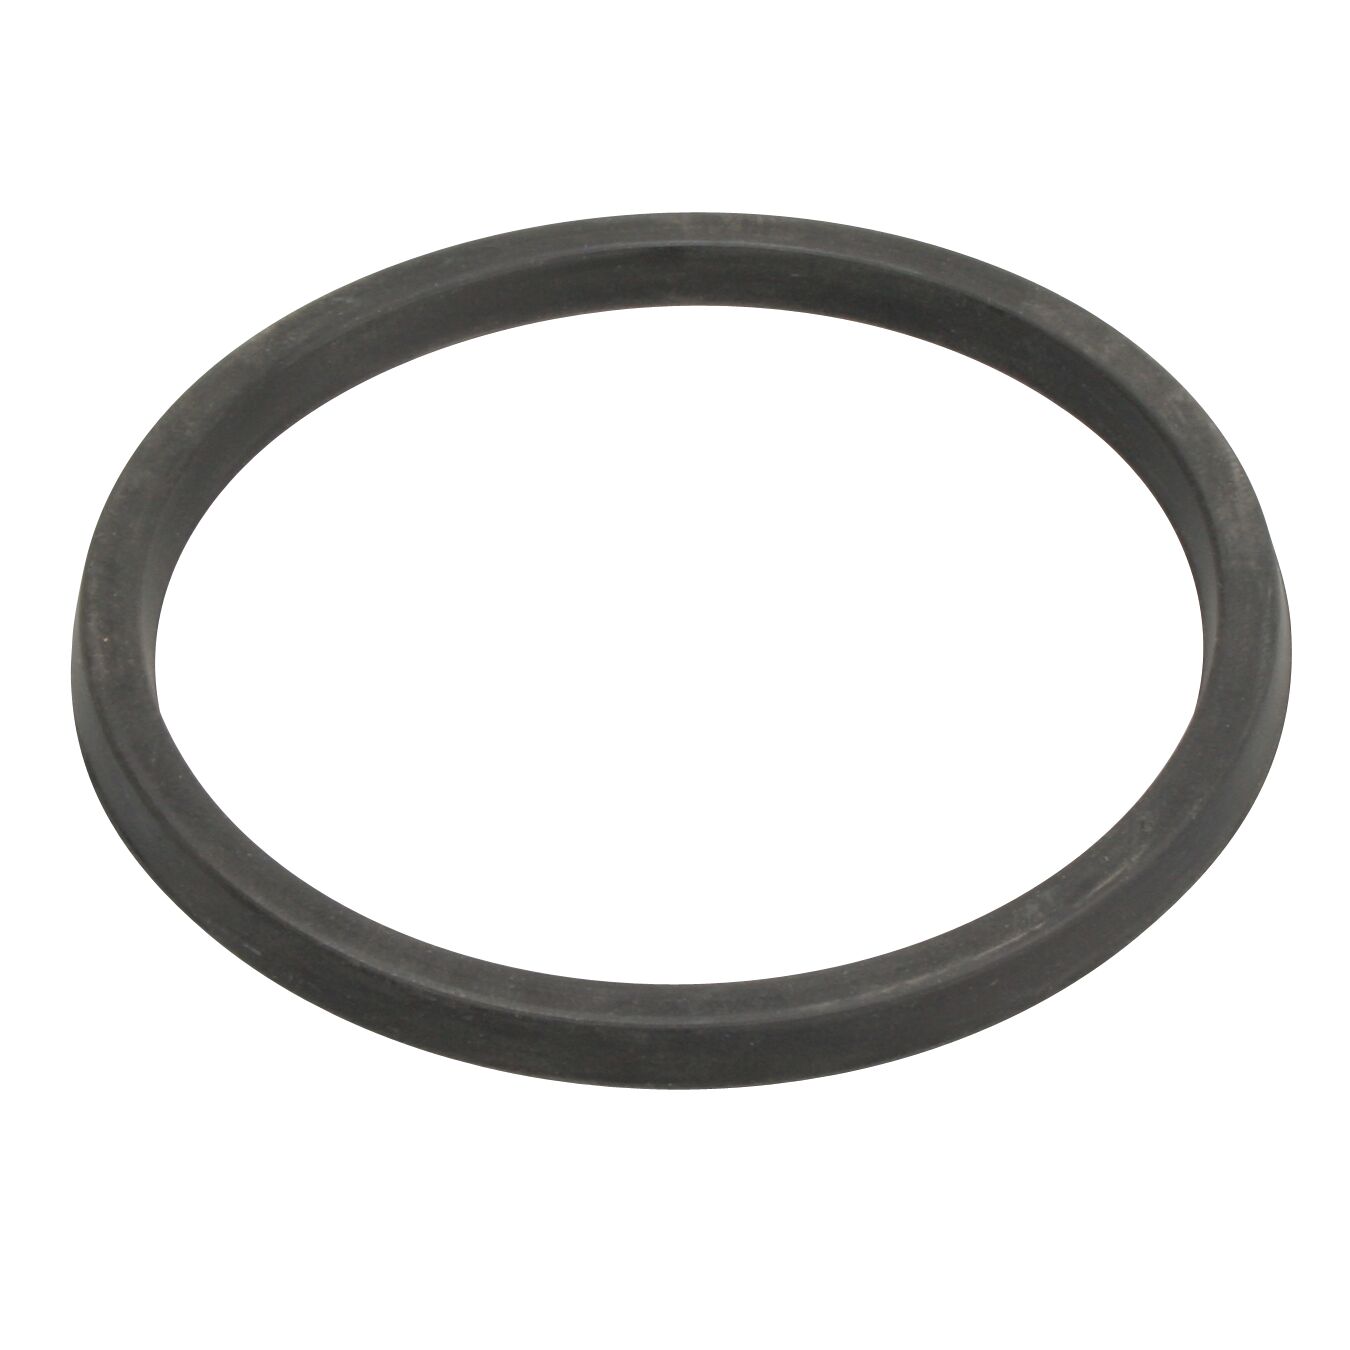 Product Image - Rubber insert